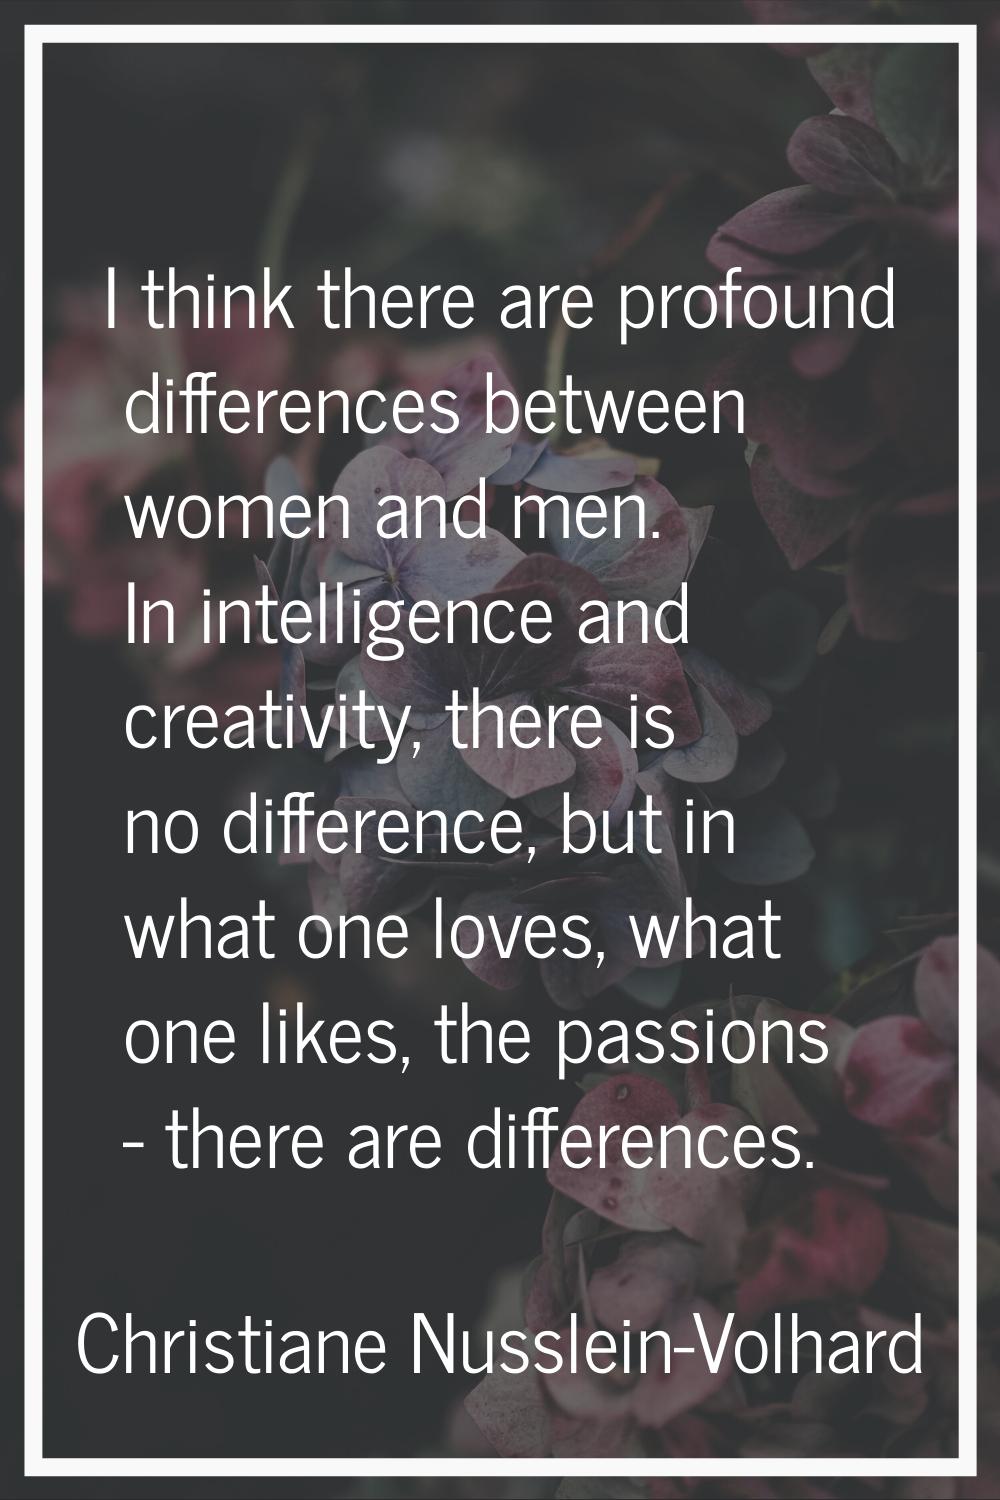 I think there are profound differences between women and men. In intelligence and creativity, there